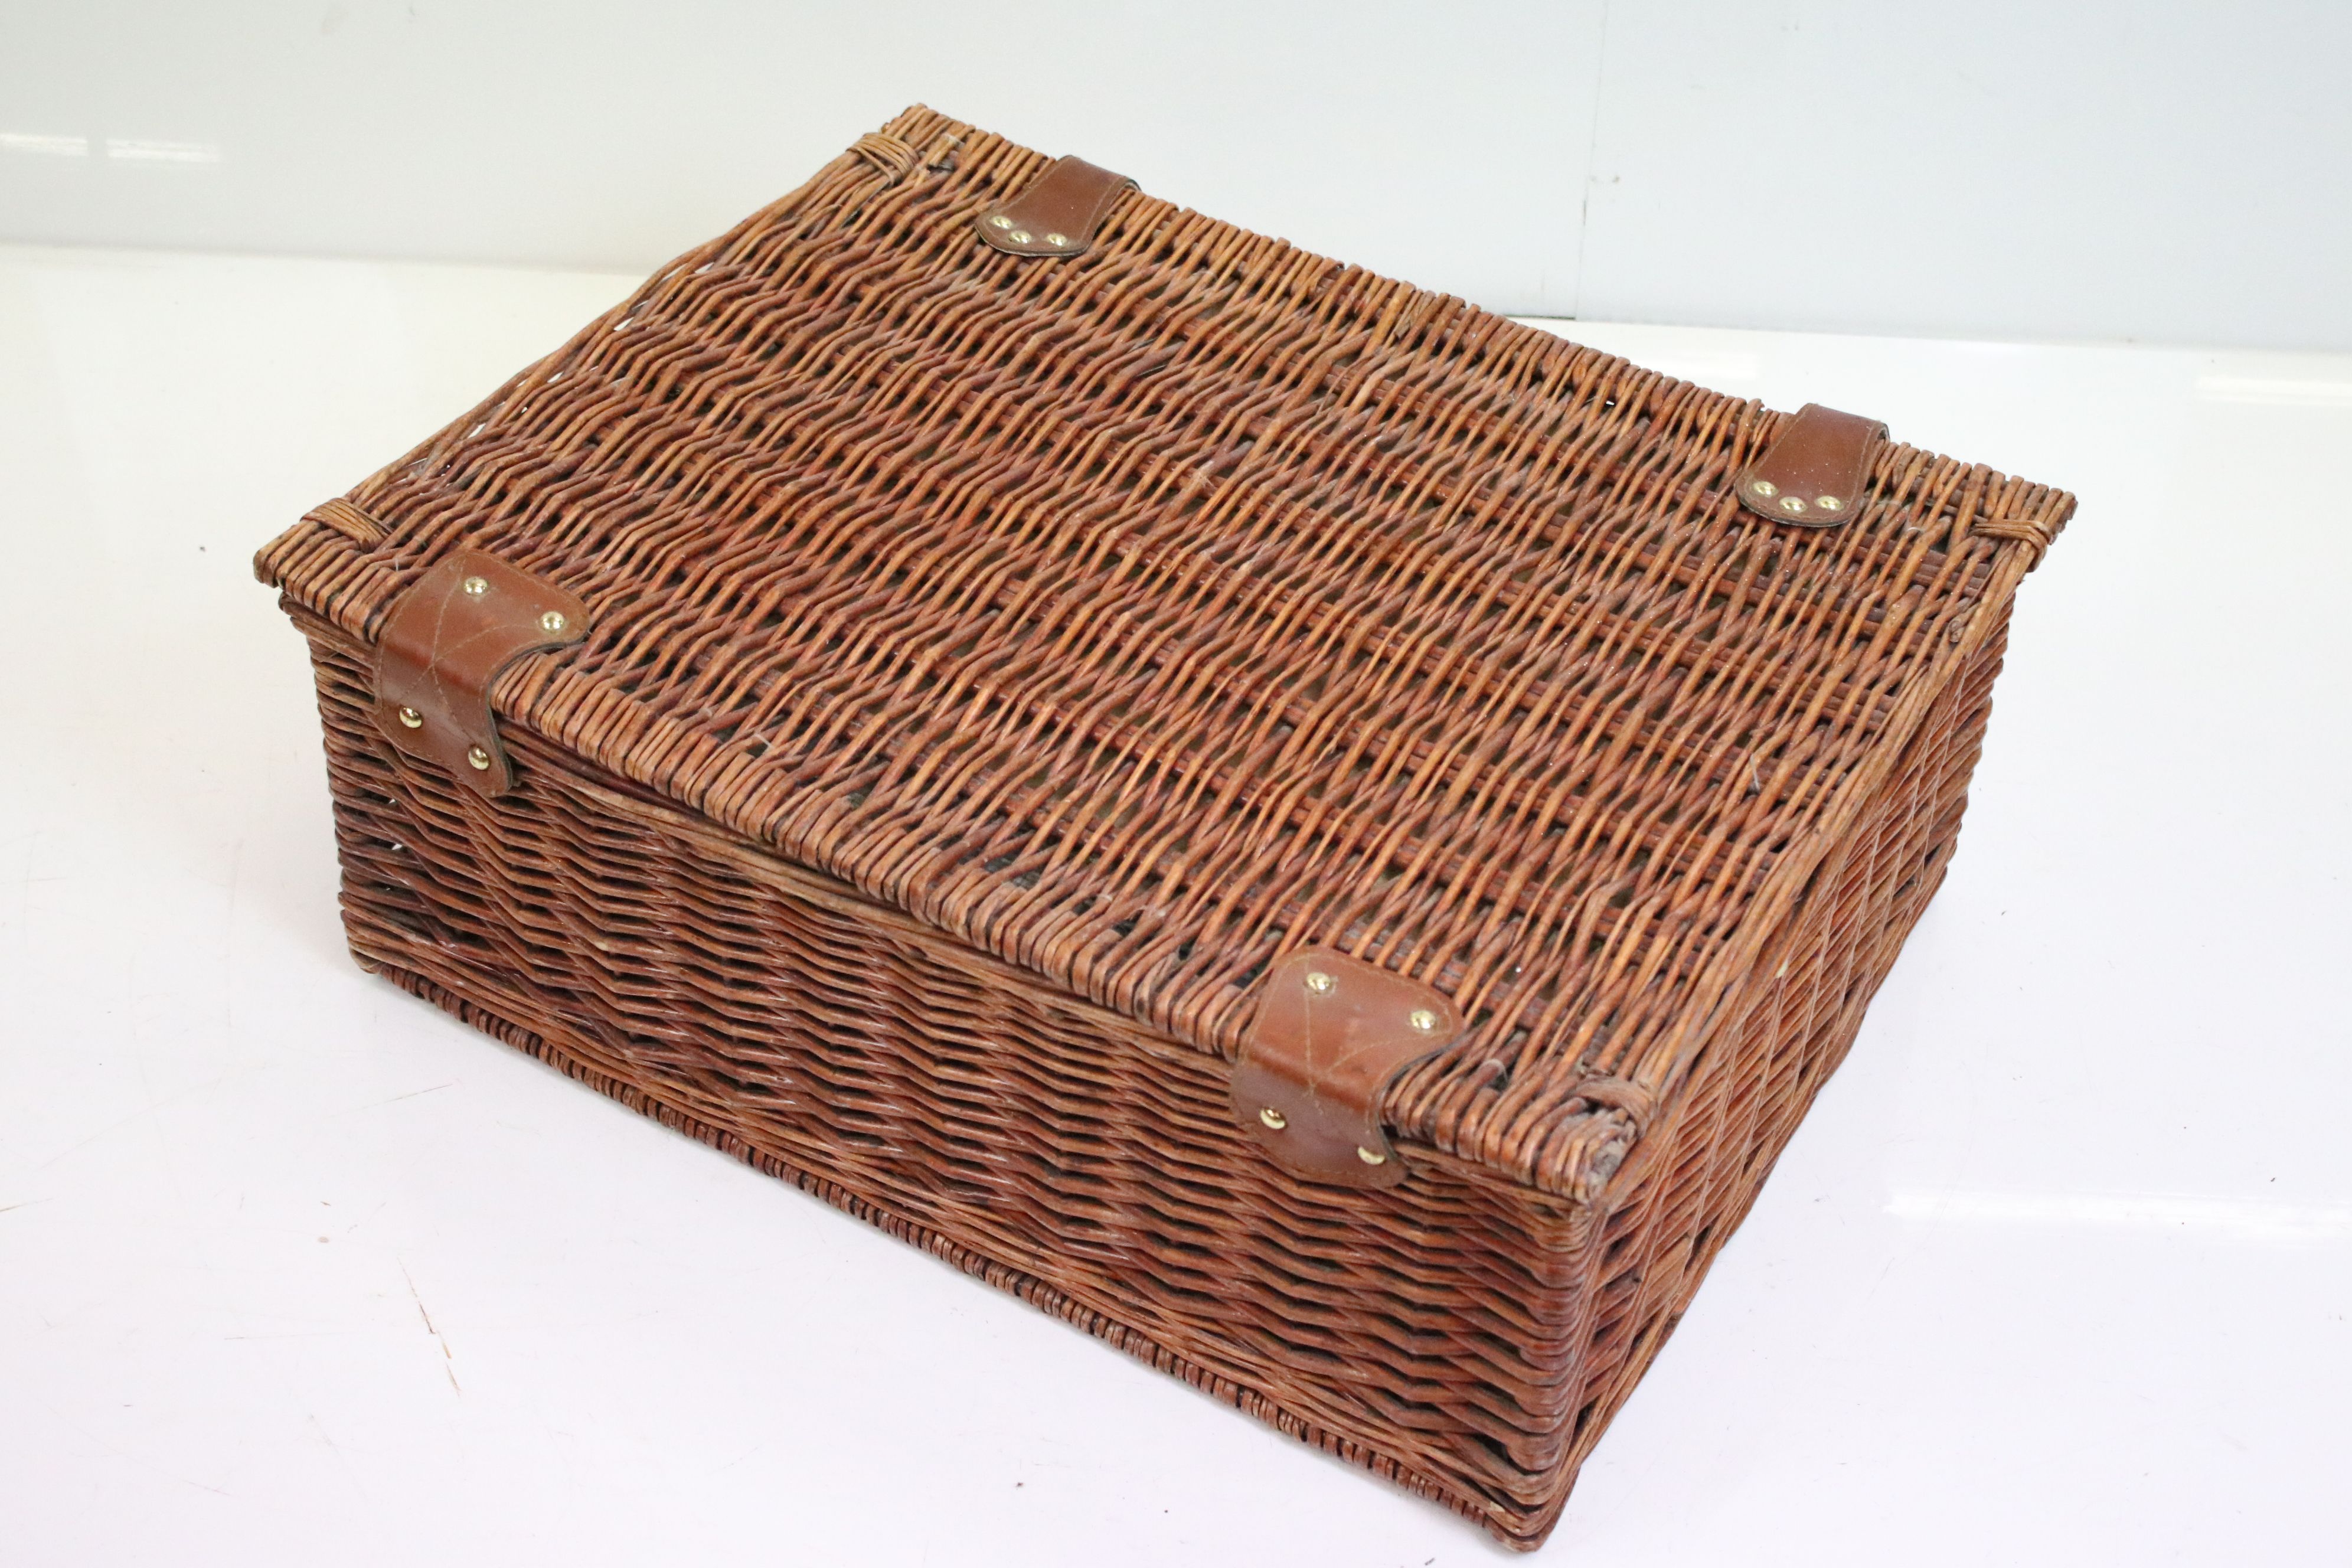 Four person picnic set in three wicker baskets, comprising cutlery, mugs, champagne glasses, - Image 7 of 7